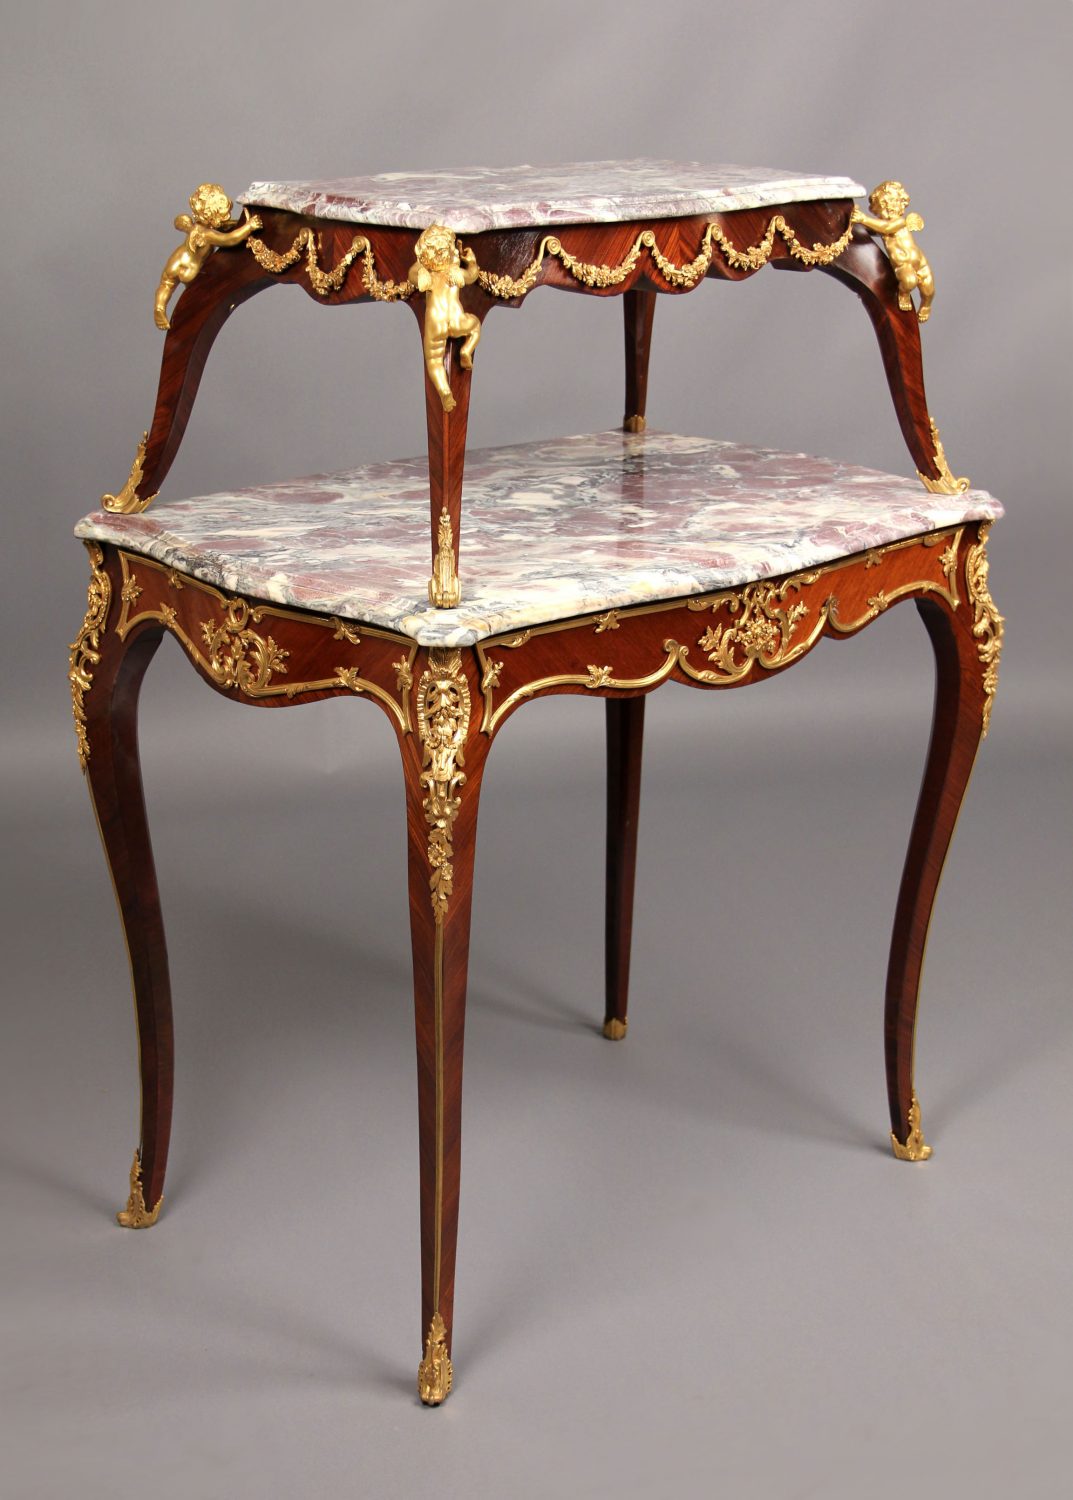 TWO LOUIS XV CARVED AND GREY-PAINTED BERGÈRES TOGETHER WITH A LOUIS XV  CARVED AND GREY-PAINTED TABOURET, MID-18TH CENTURY, Style: Silver,  Furniture, Ceramics, 2020